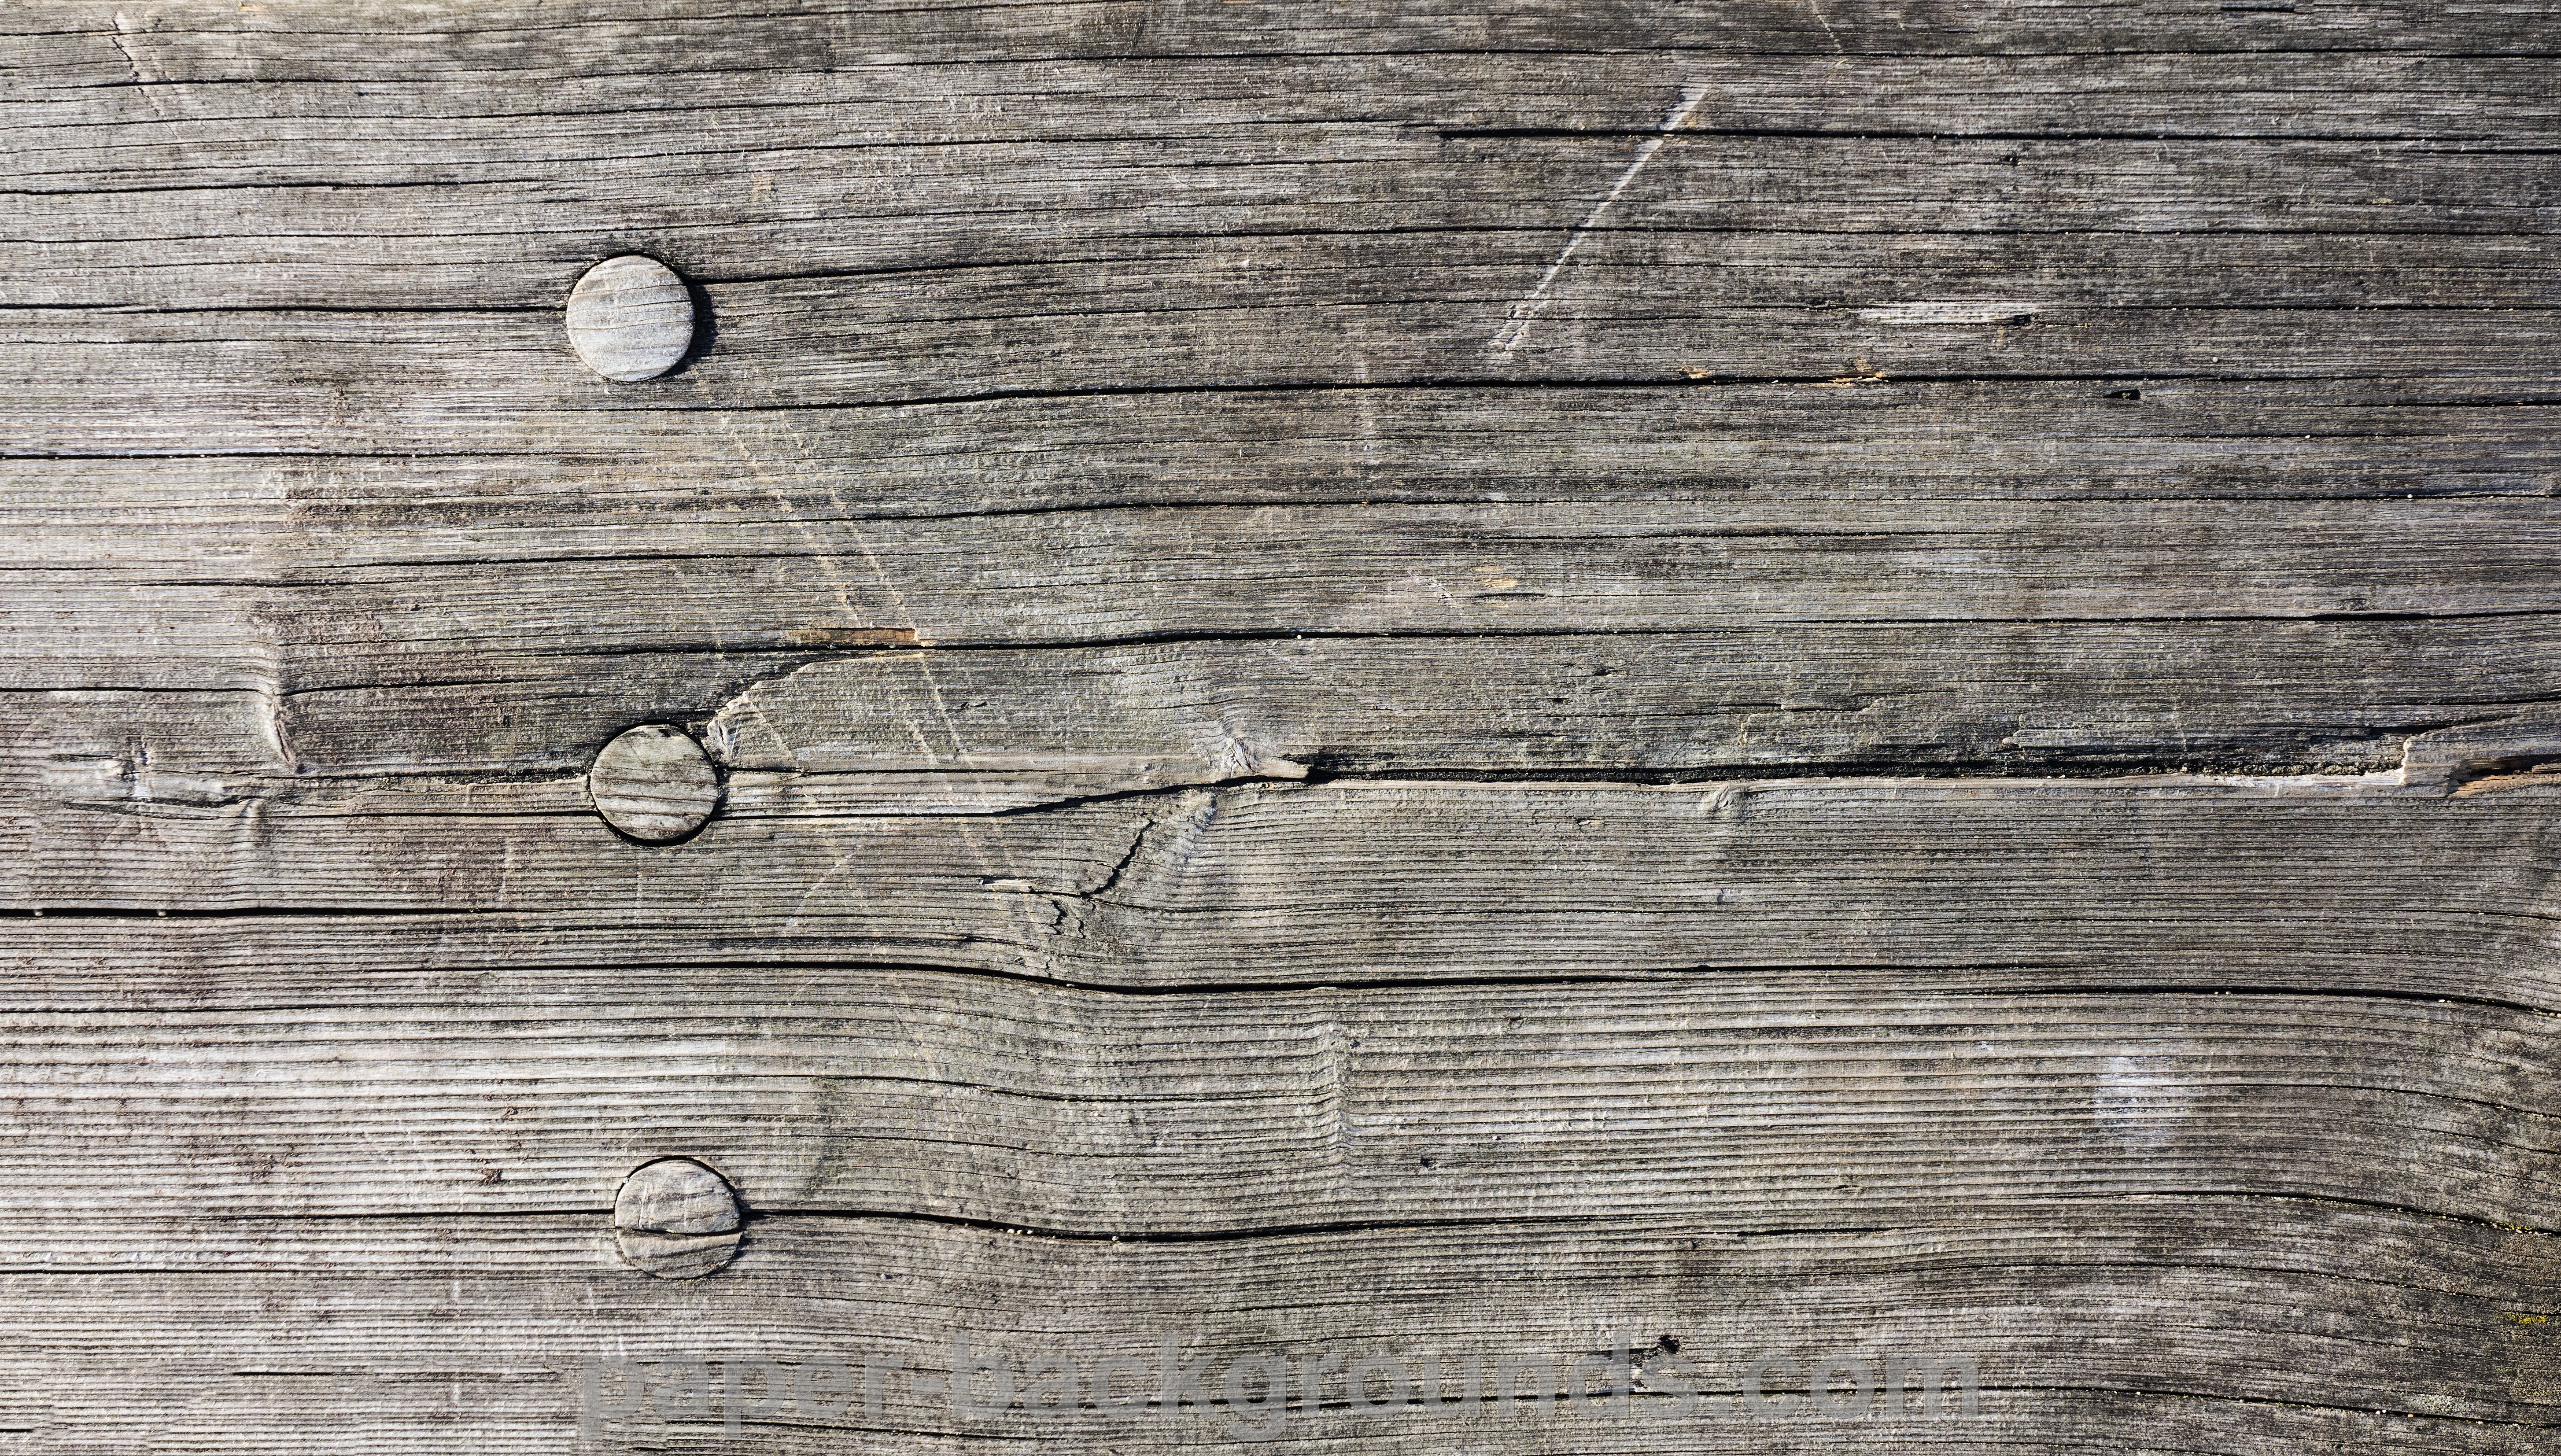 Rustic Wood Panel Background